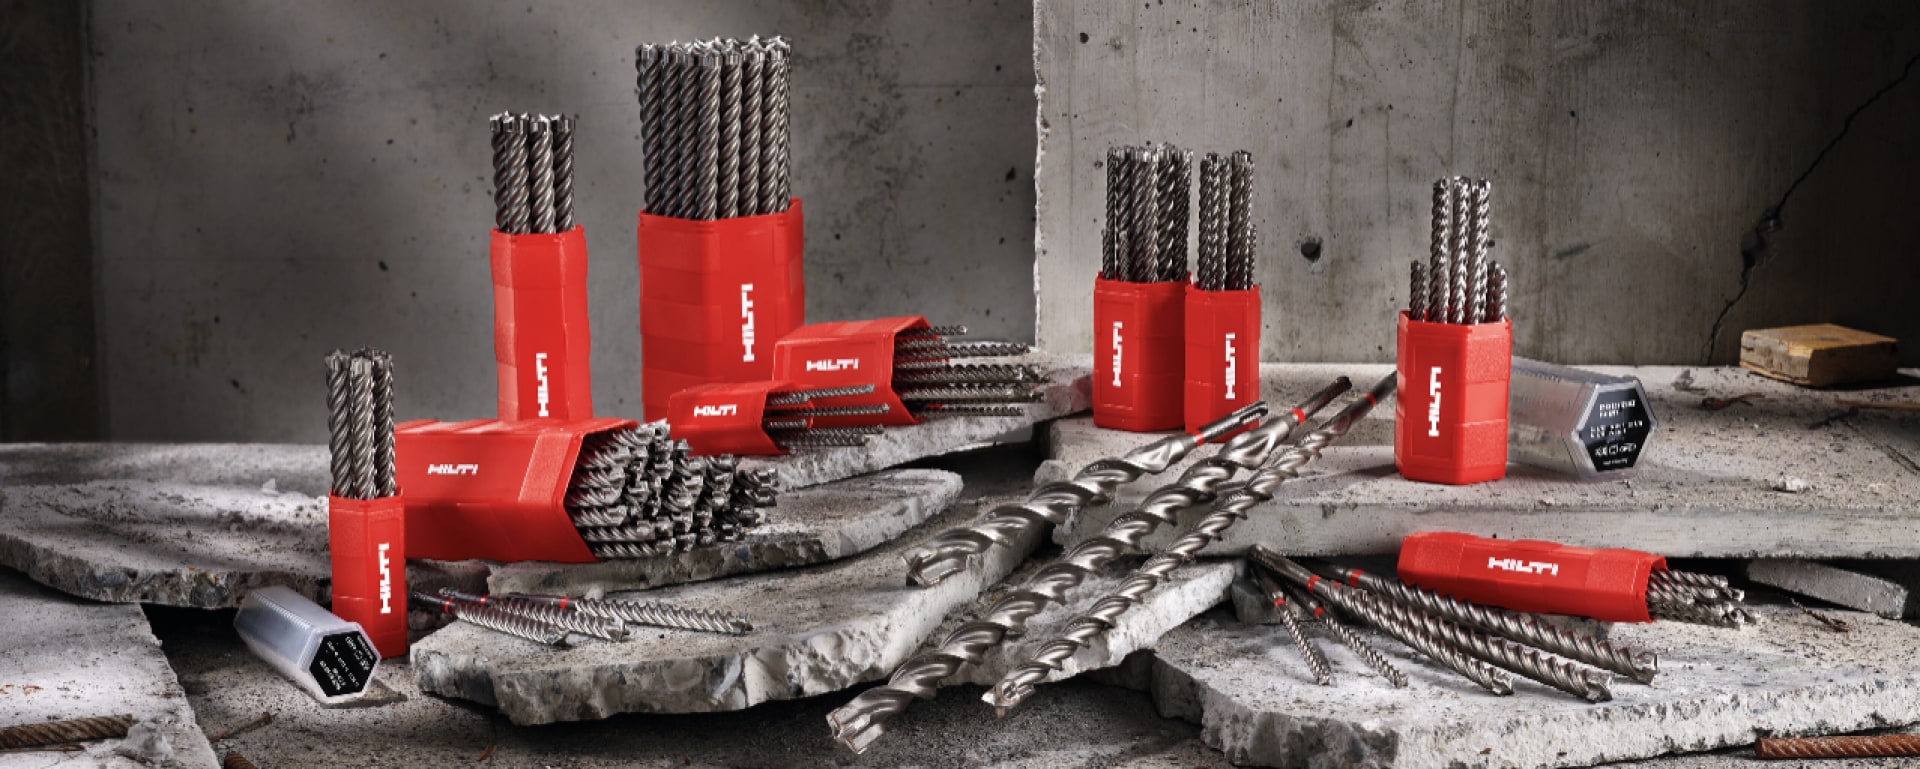 A collection of TE CX drill bits placed atop a mound of rubble